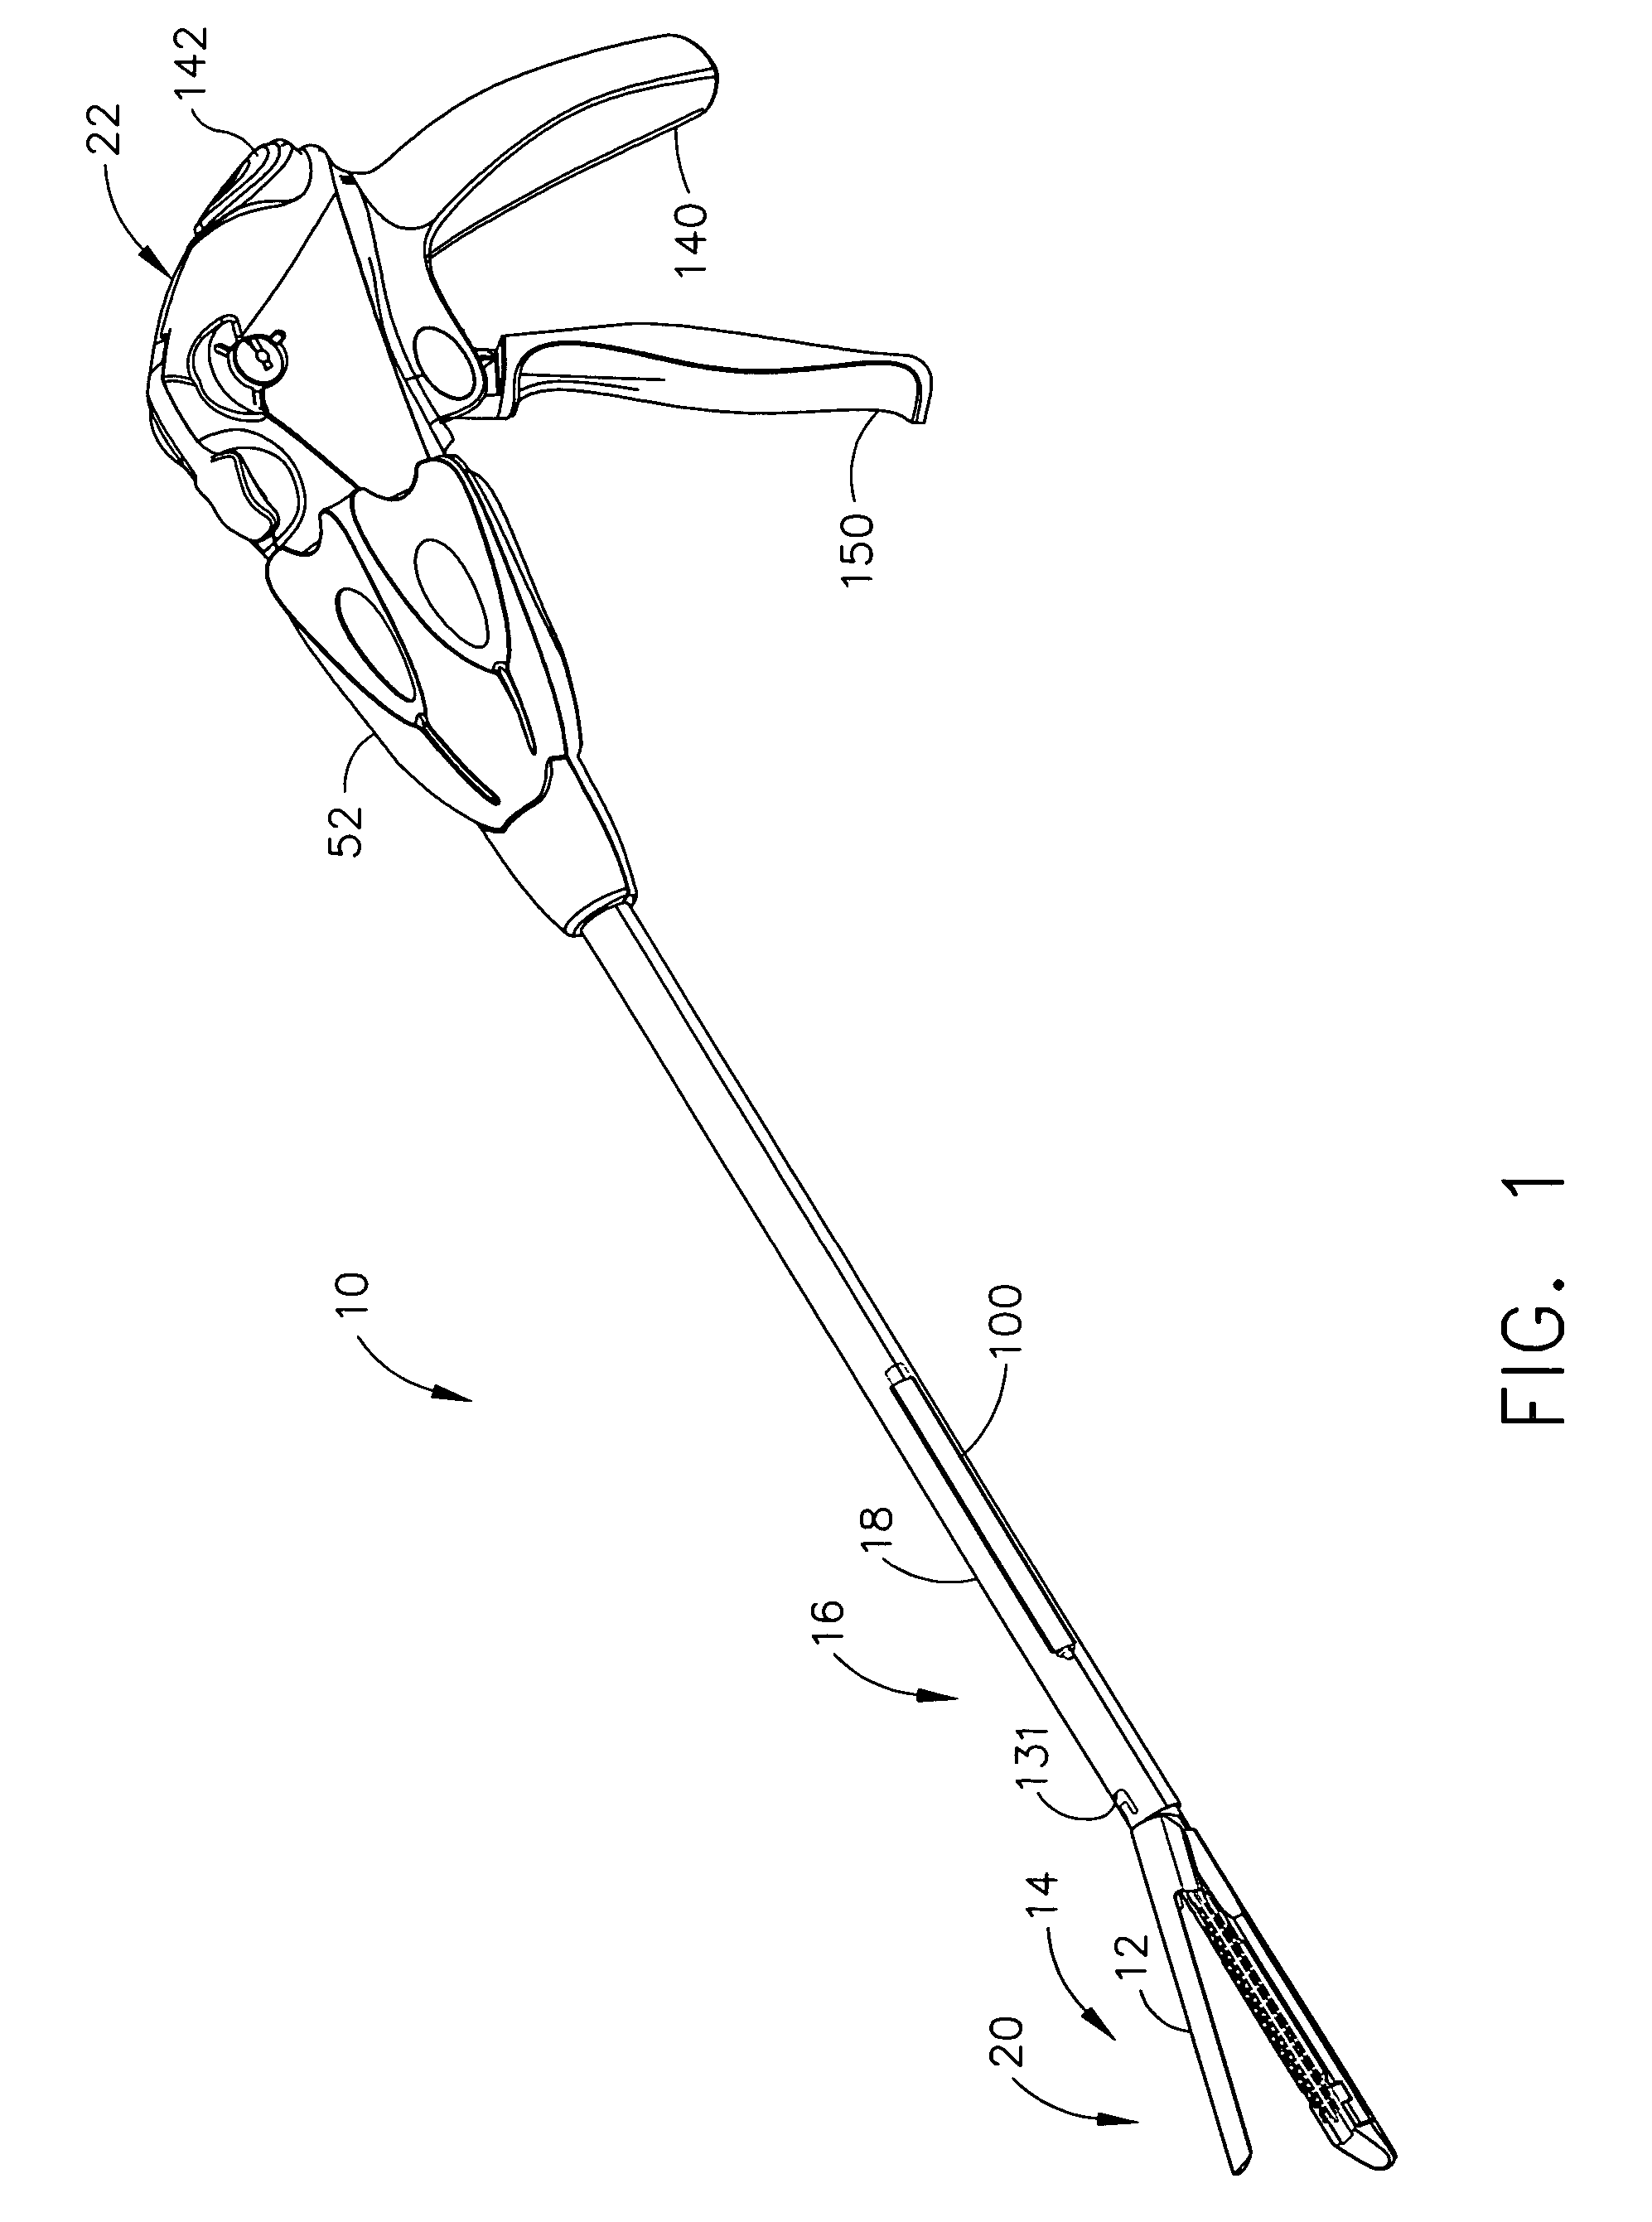 Surgical instrument having fluid actuated opposing jaws